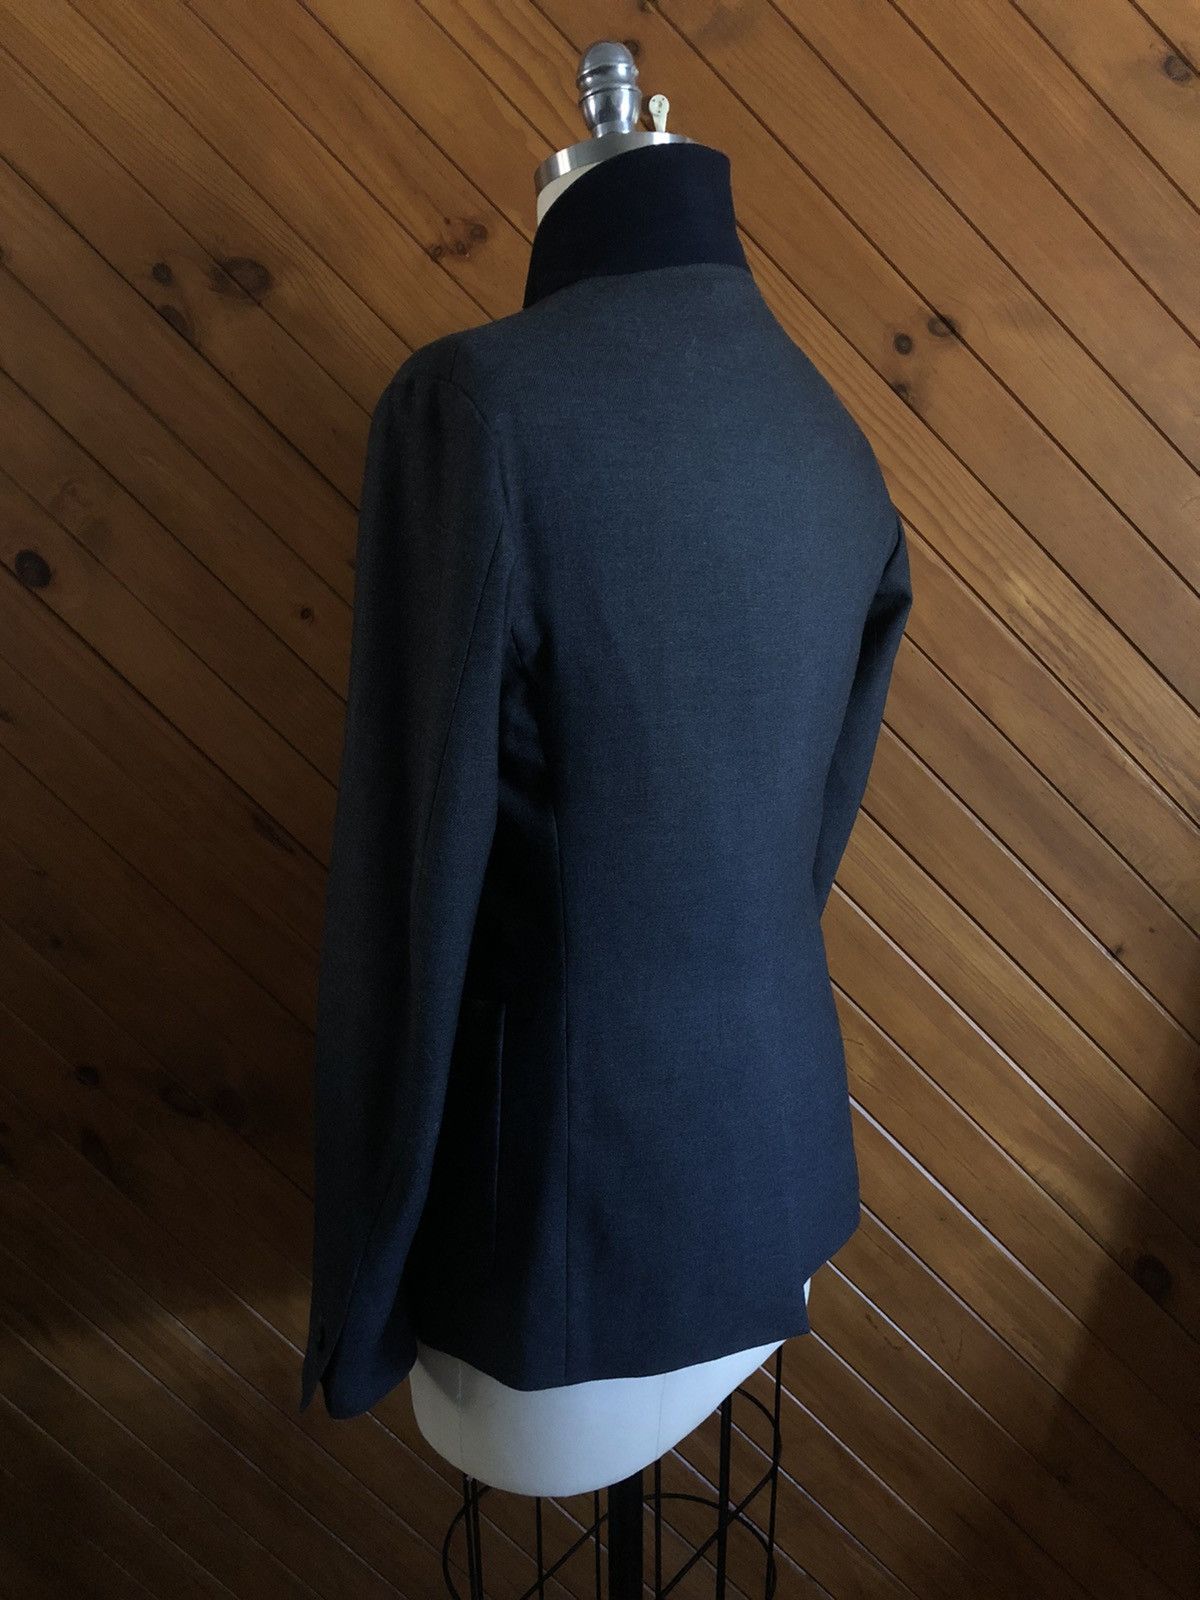 Japanese Brand A vontade / Easy Blazer Jacket / Made in Japan / sz M/L Size 38R - 3 Thumbnail